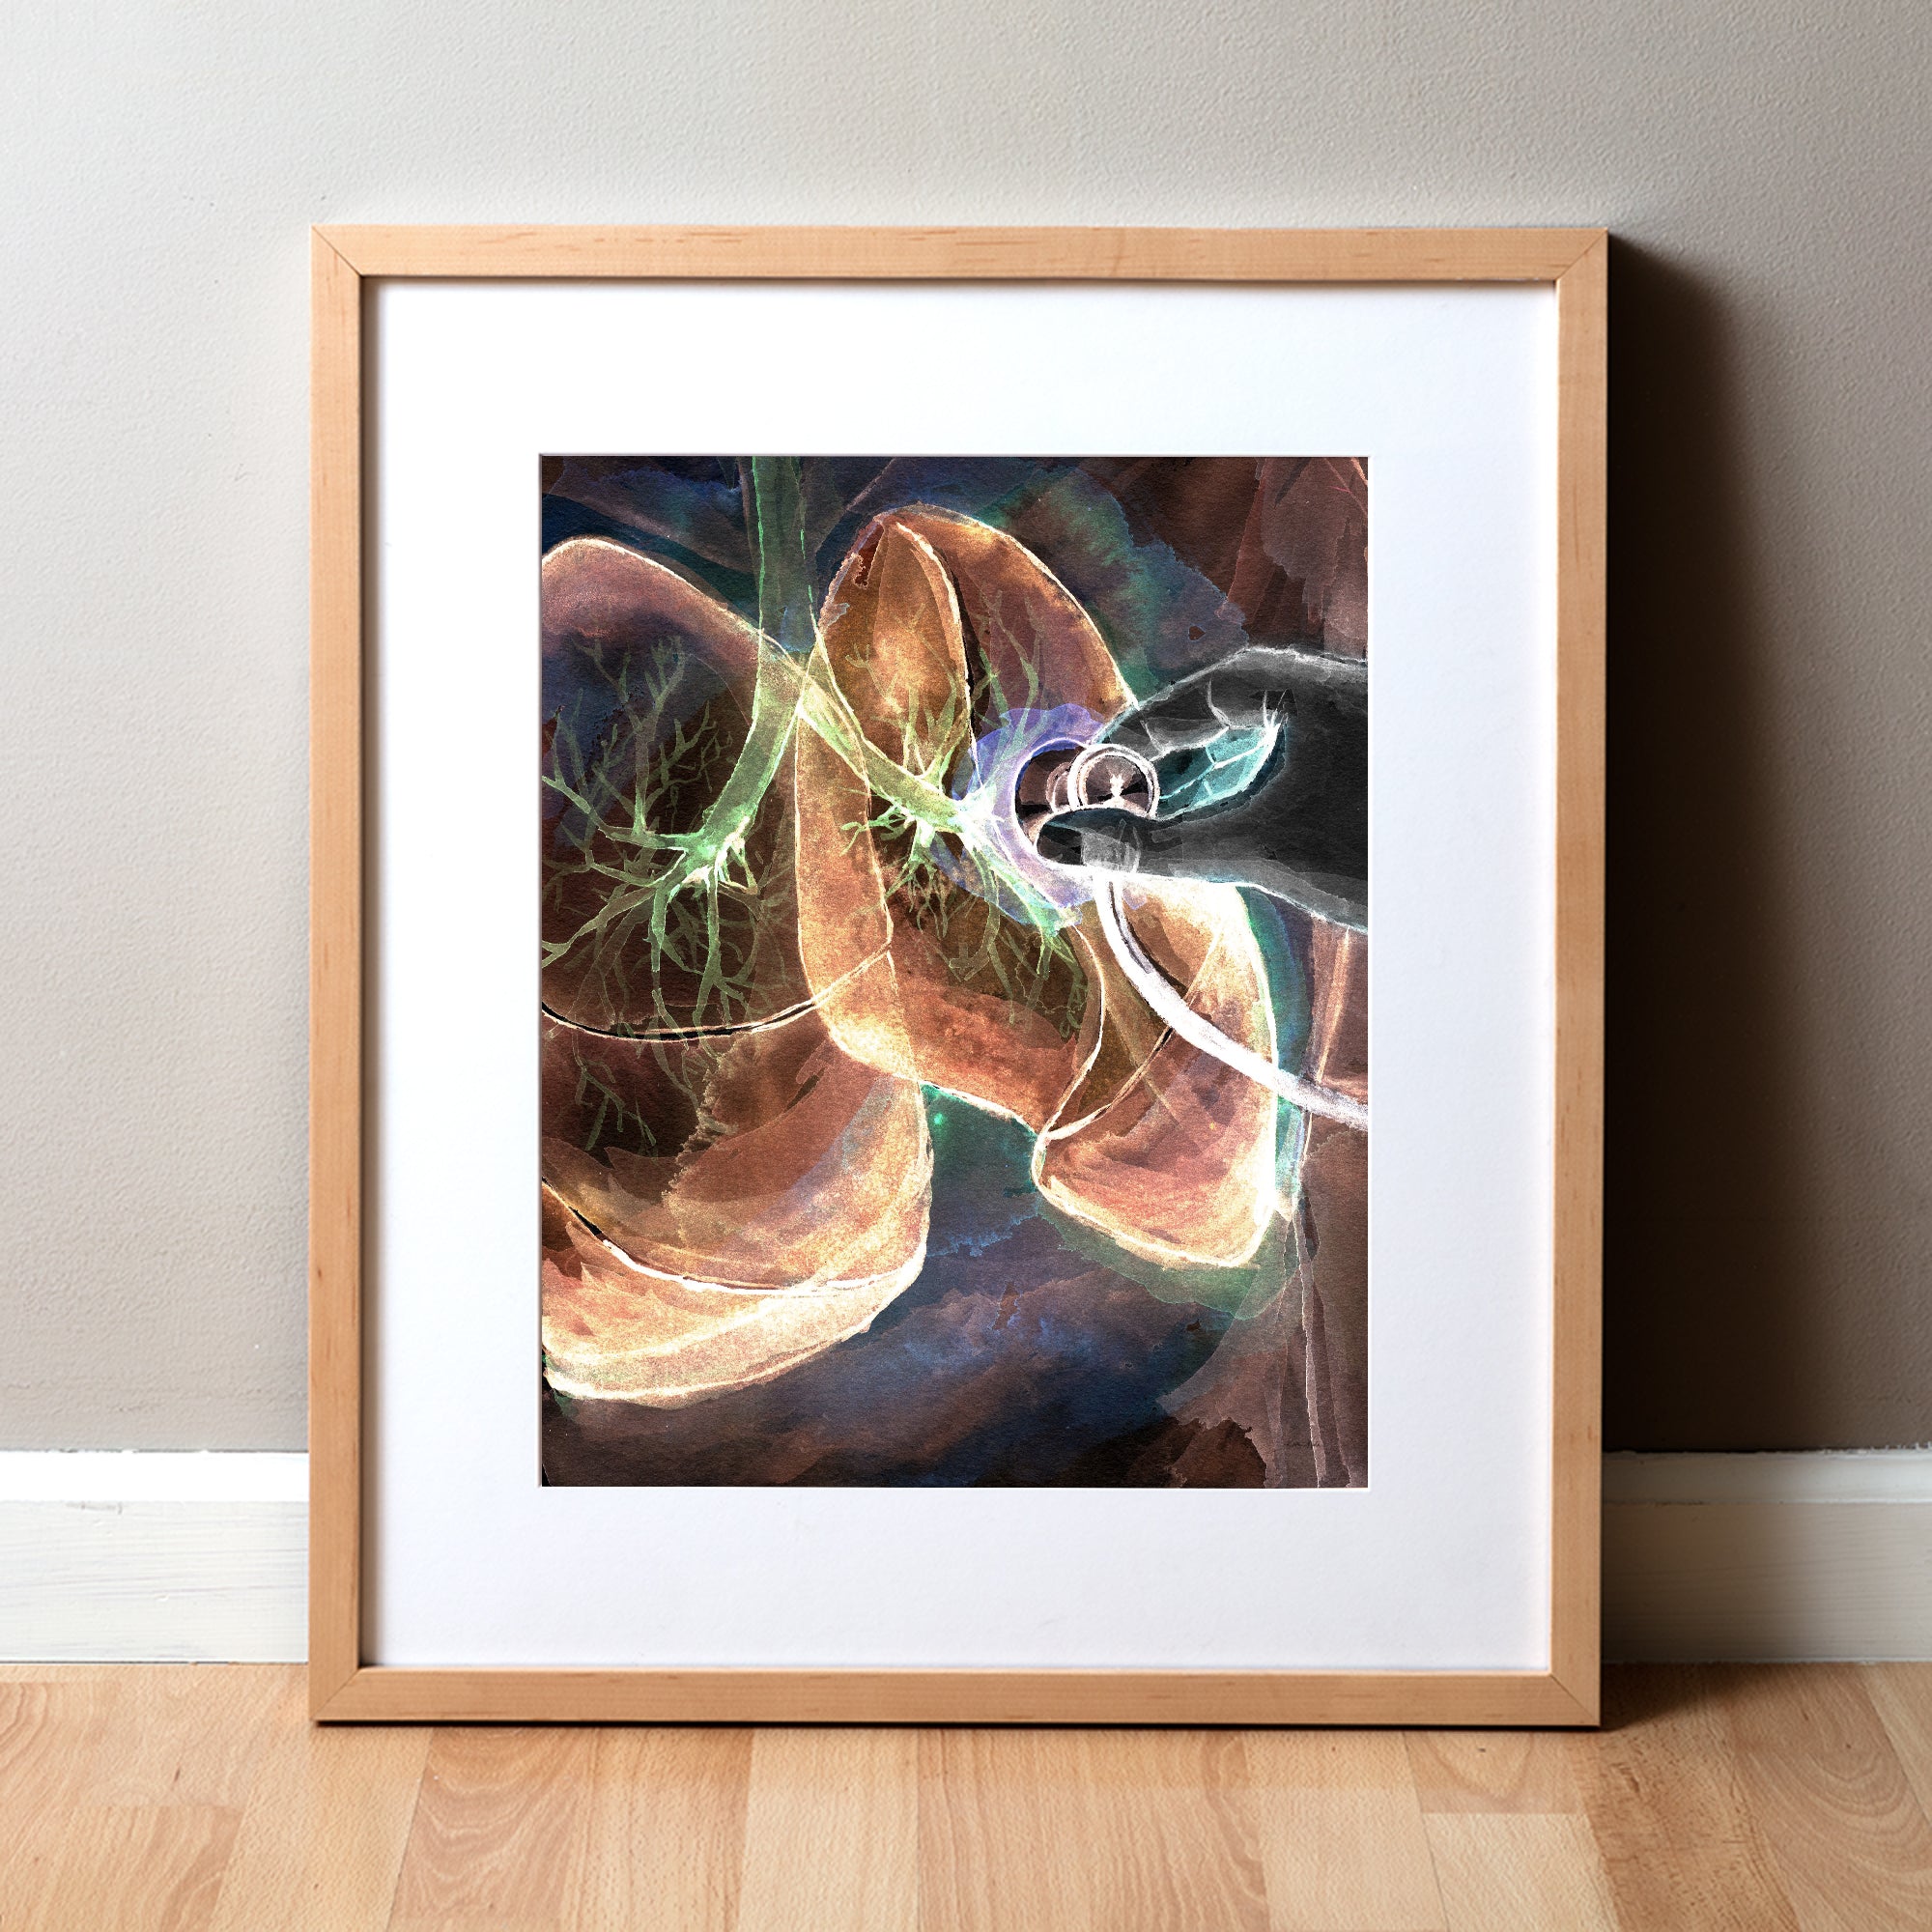 Framed watercolor painting of lung auscultation in orange, black, green, and purple.